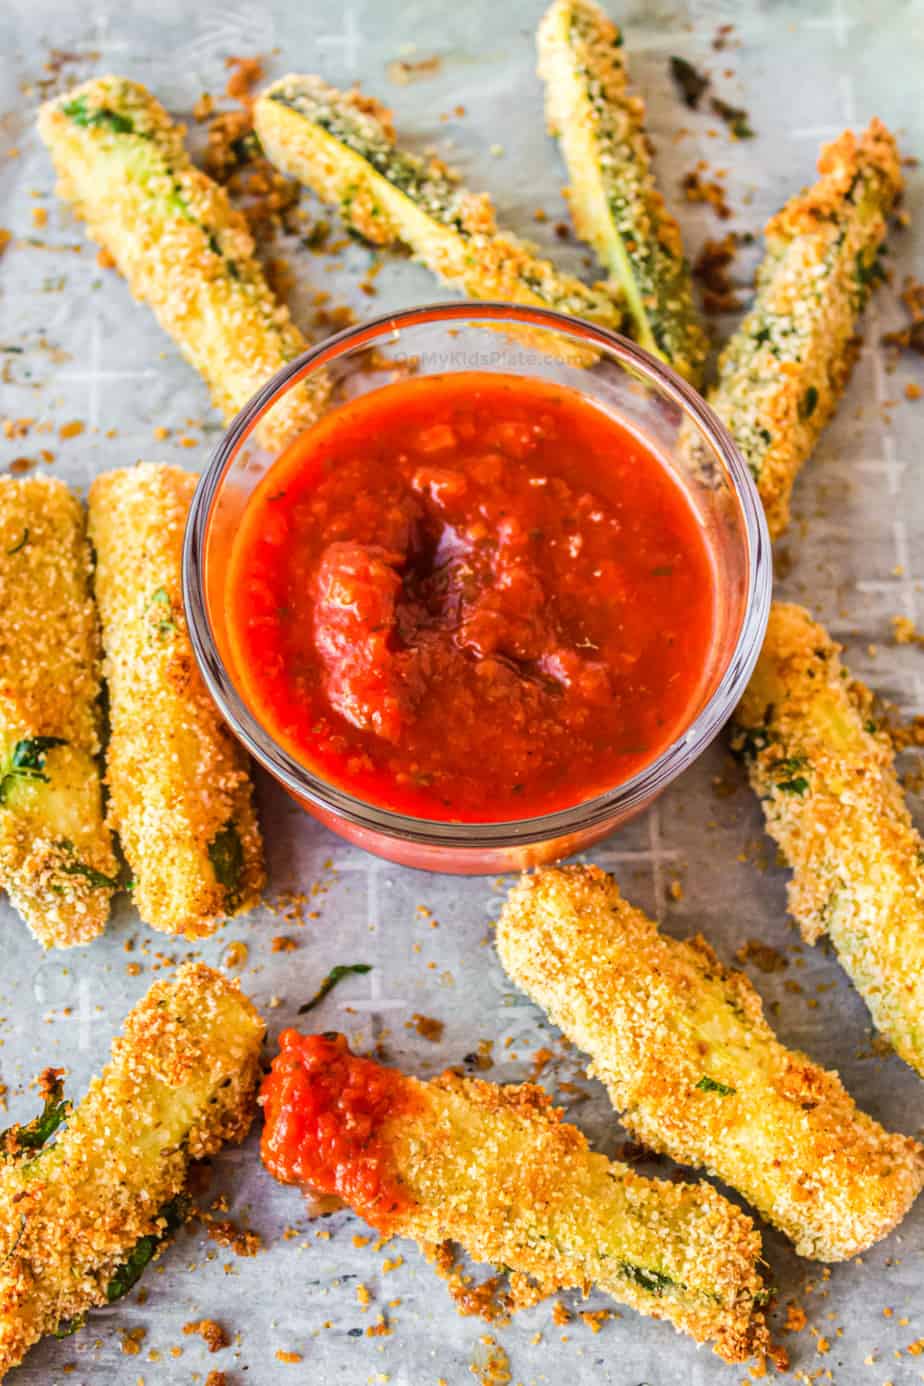 Golden brown zucchini fries next to marinara sauce on parchment paper. One fry is dipped in red marinara sauce.